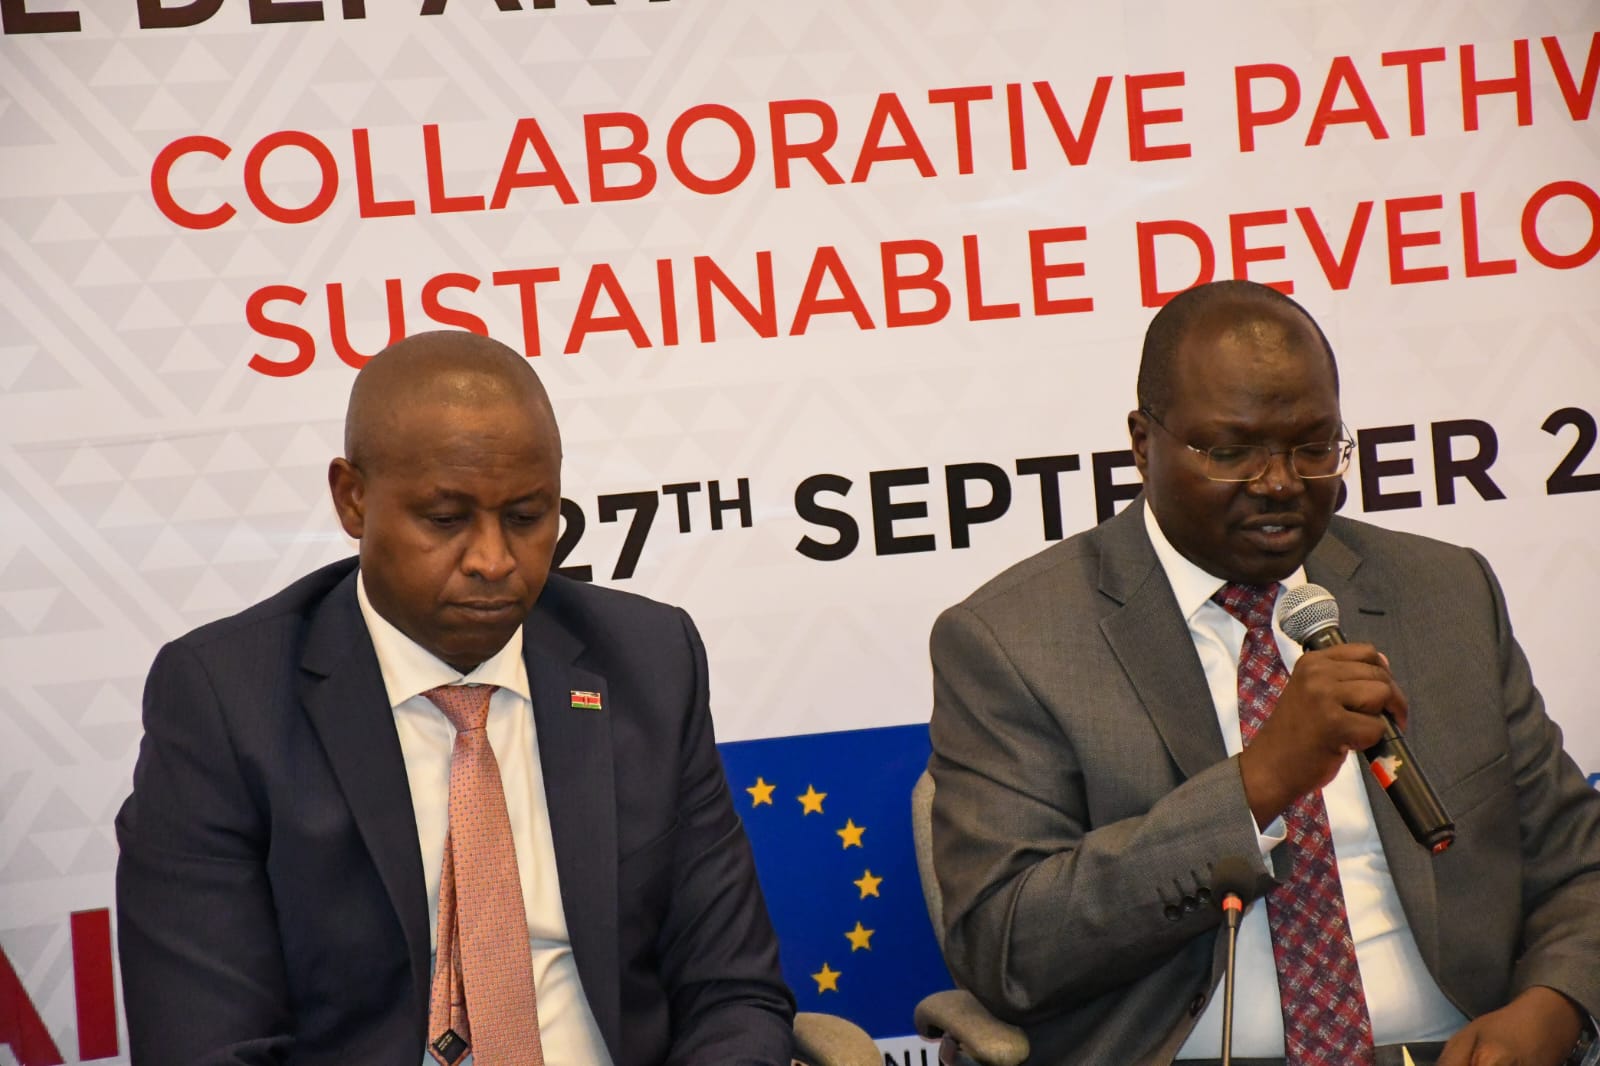 The Cabinet Secretary for Co-operatives and MSMEs Development Hon. Simon Kiprono Chelugui earlier today was accompanied by the Principal Secretary State Department for Co-operatives Mr. Patrick Kilemi attends the inaugural state Department for Cooperatives and Development Partners consultative meeting on development. The event theme is "Collaborative Pathways to Sustainable Development: Transforming Cooperatives through Strategic." The event brings together governments, development partners, cooperatives, and civil society organizations to join hands, leveraging their unique strengths and resources. Strategic partnerships, as our compass, have the potential to unlock doors to innovation, facilitate access to financial resources, expand market reach, and nurture skills development.